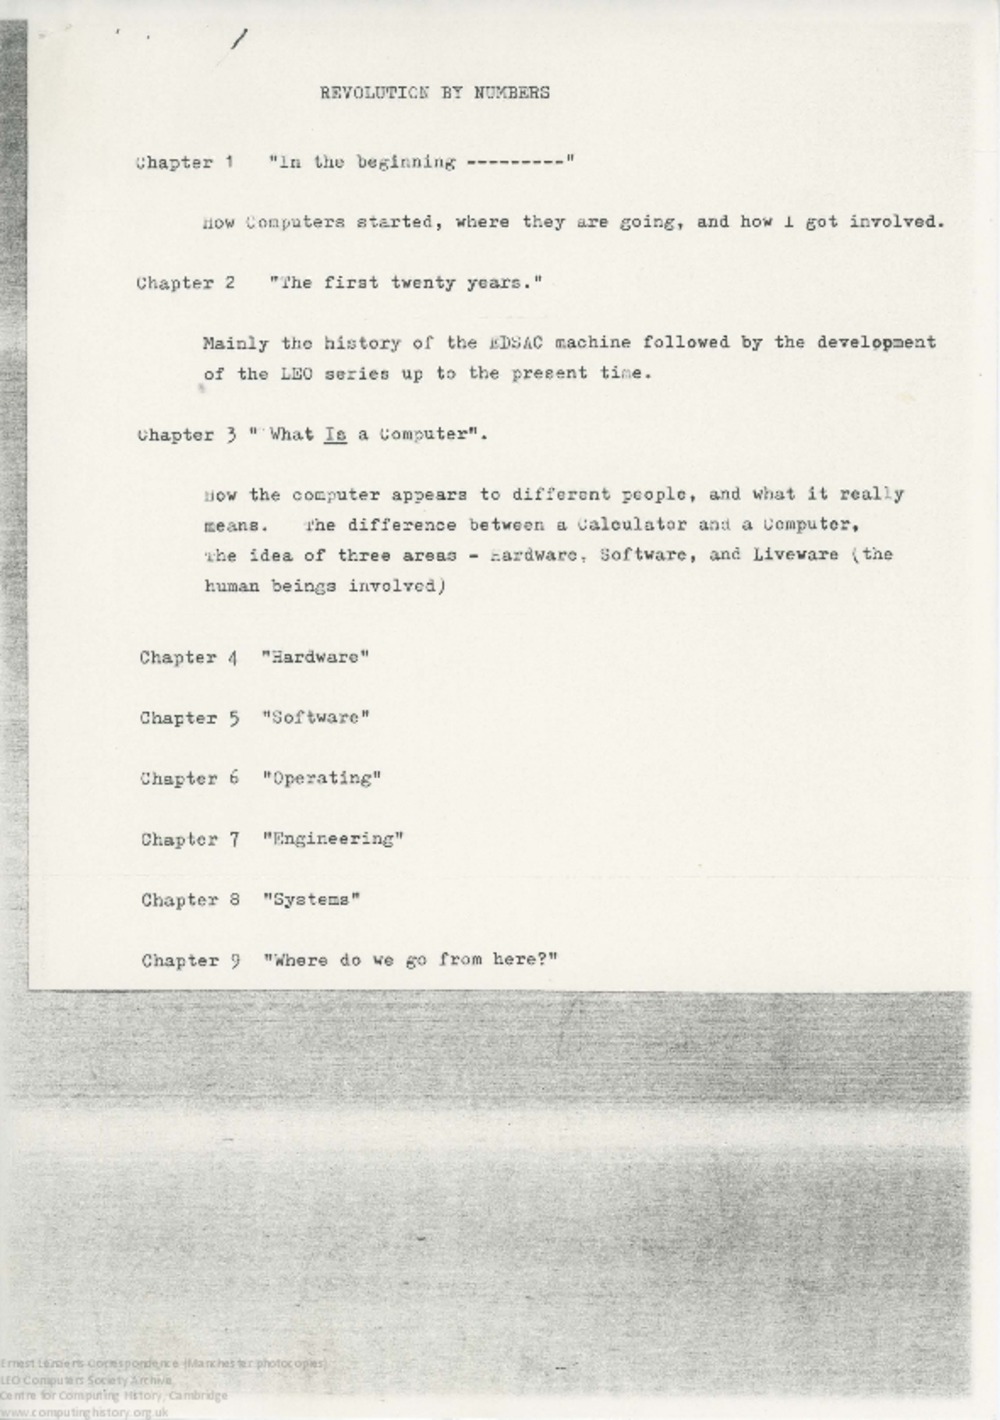 Article: 62899 Lenaerts: Revolution by Numbers, Chap 4. Hardware (draft), 30th Jul 1971